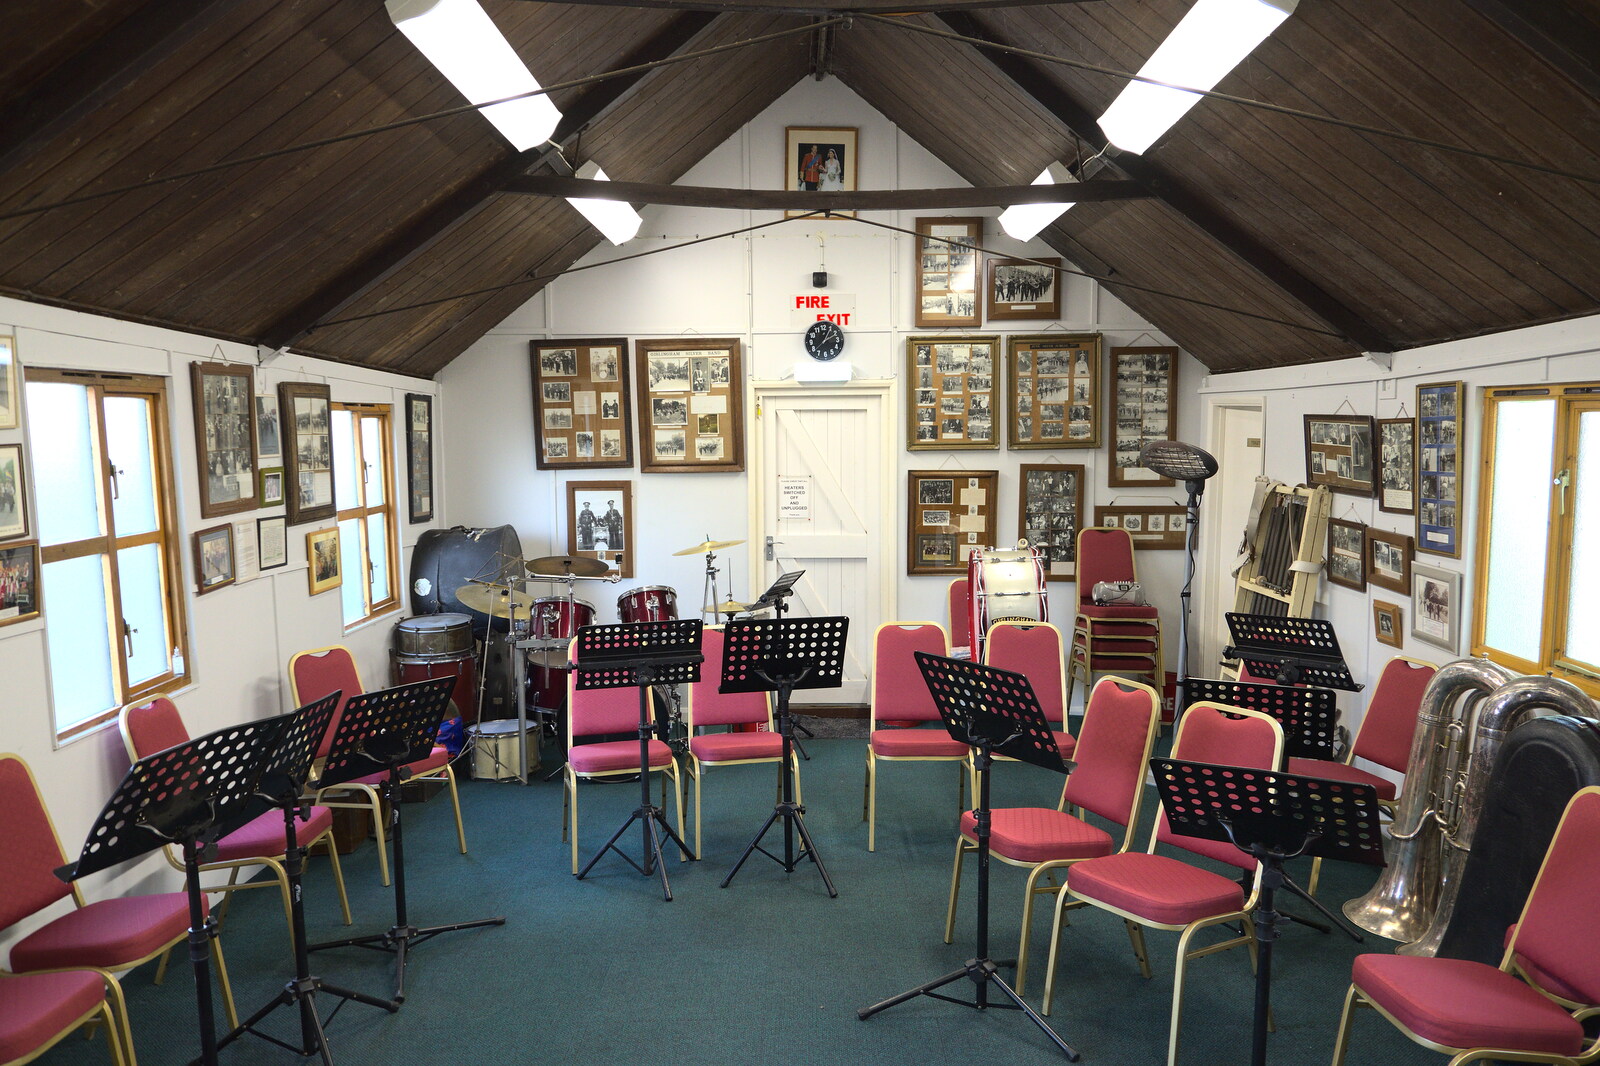 A Few Hours at Alton Water, Stutton, Suffolk - 22nd October 2022: Inside the Gislingham Band Hut